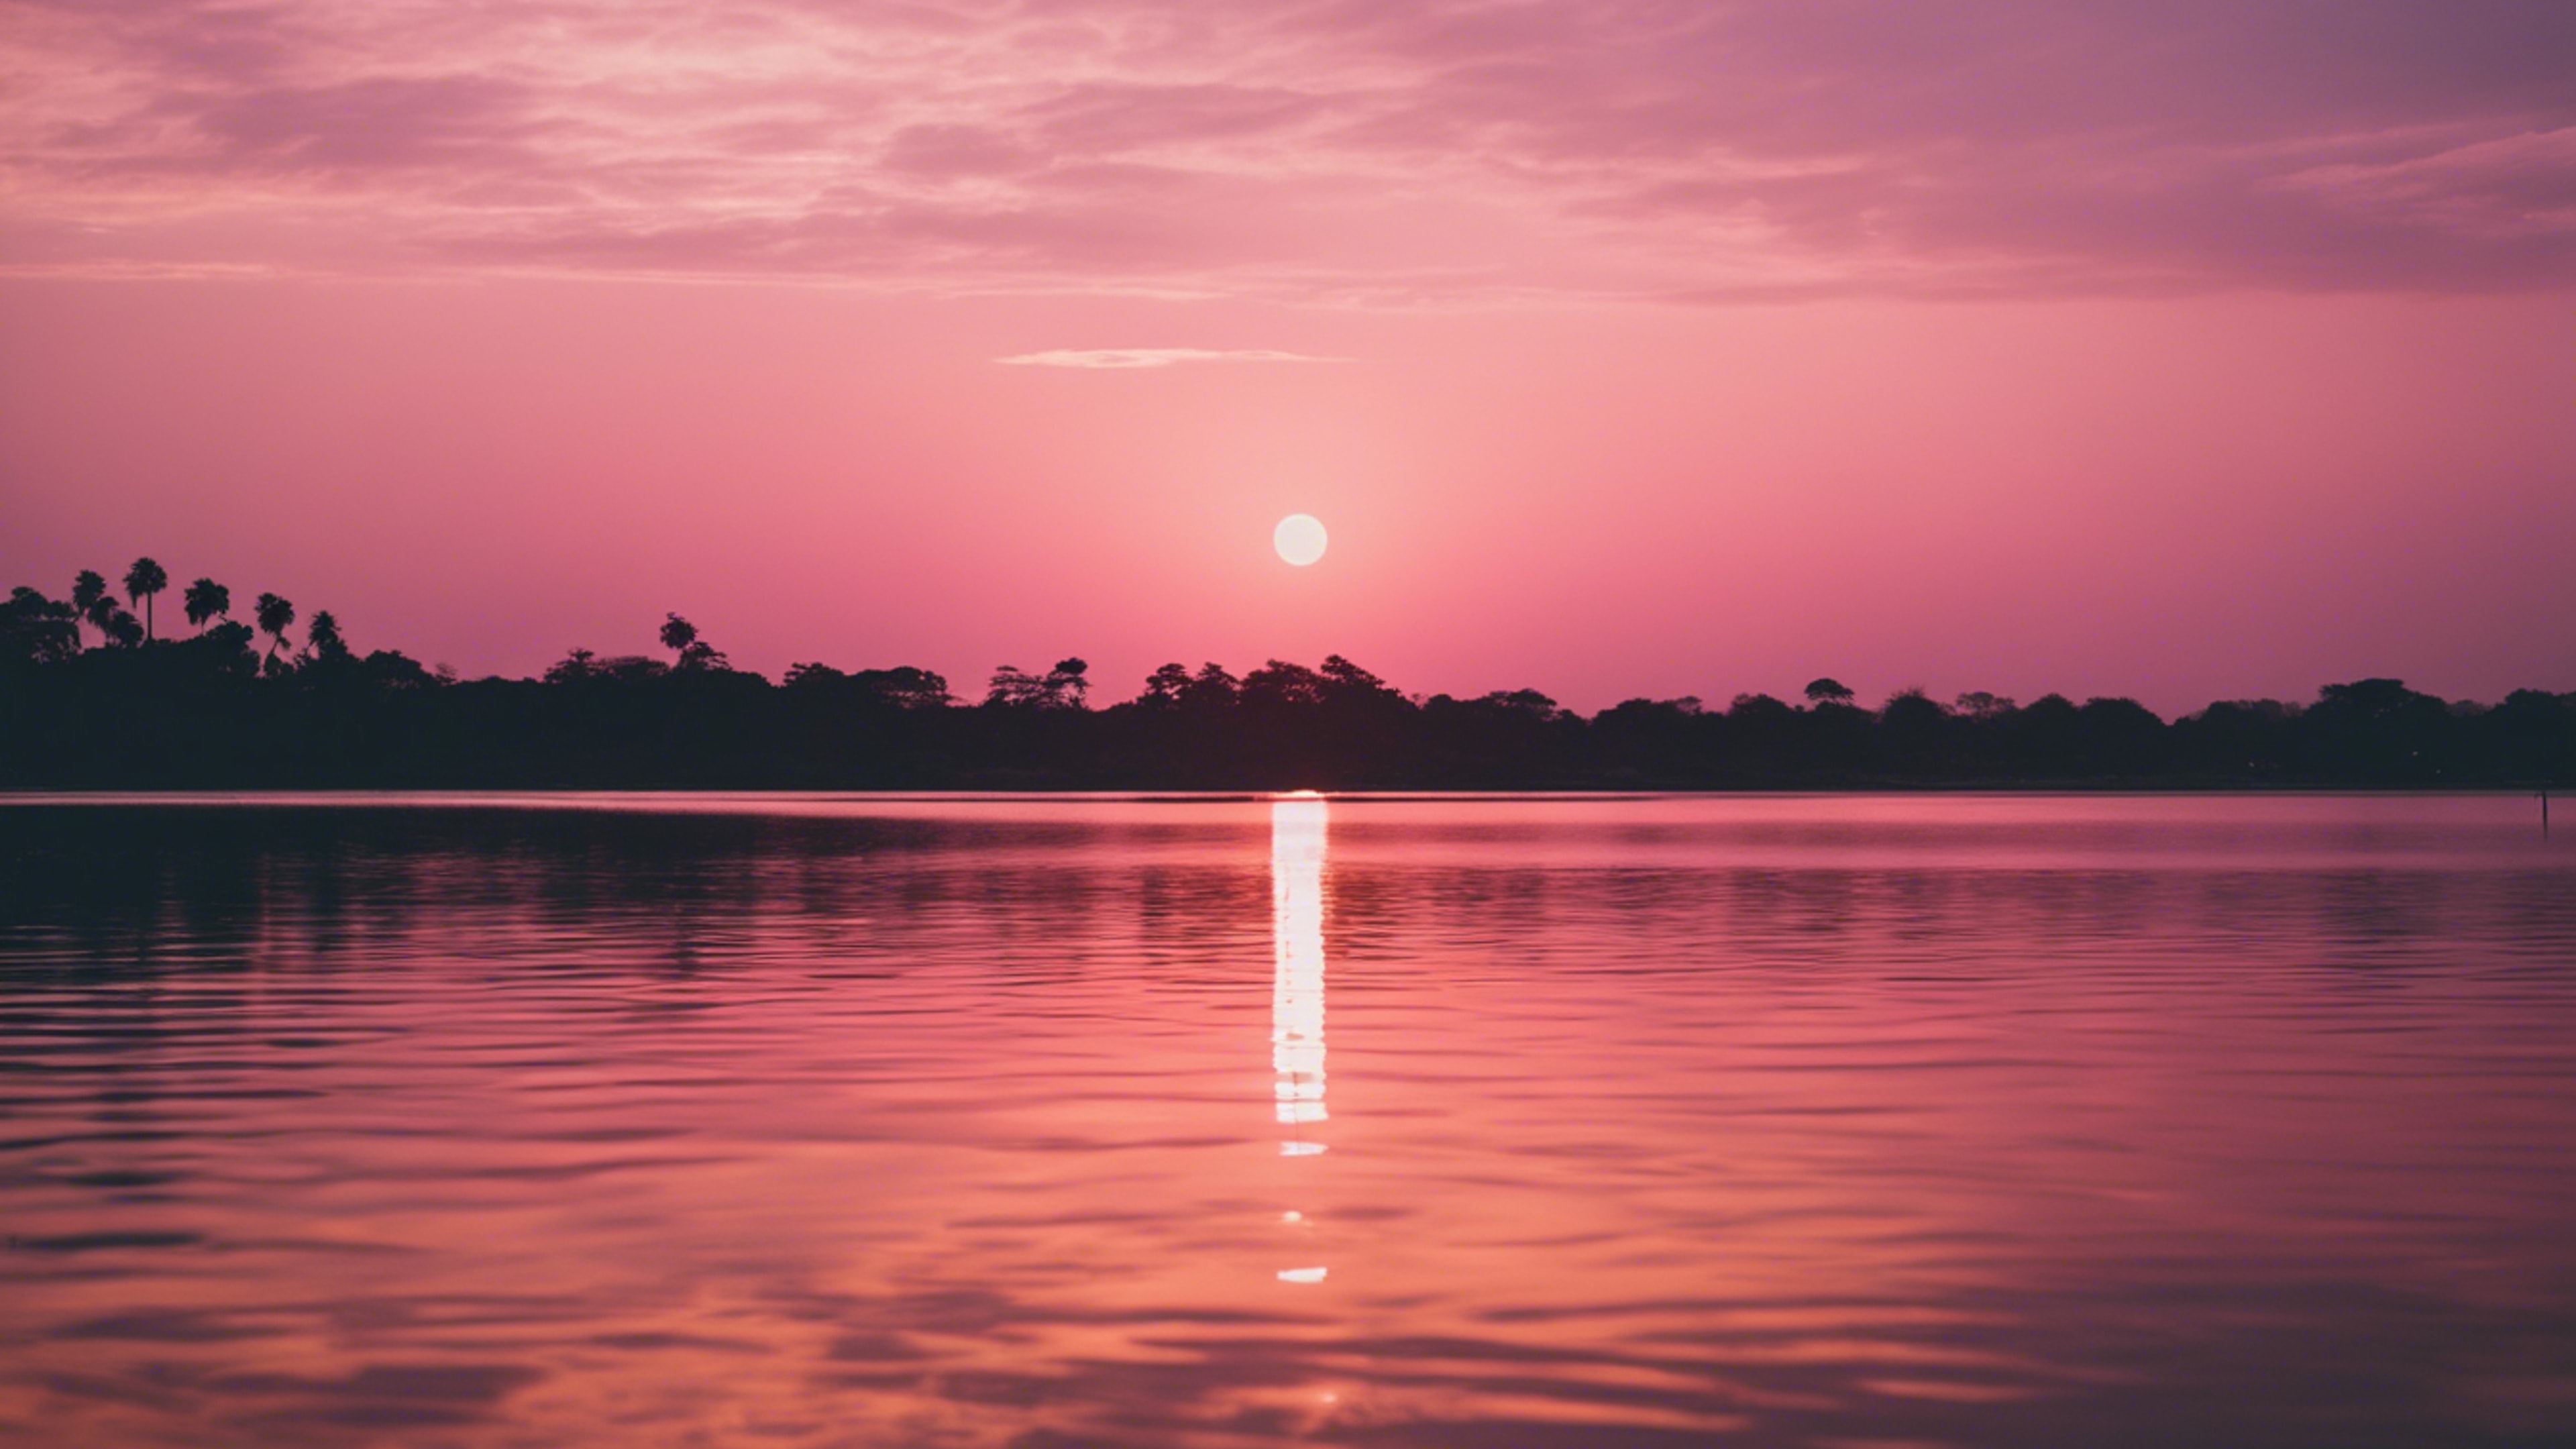 A picturesque pink and gold sunset reflecting on tranquil lagoon waters. duvar kağıdı[938883e46b5847a4931b]